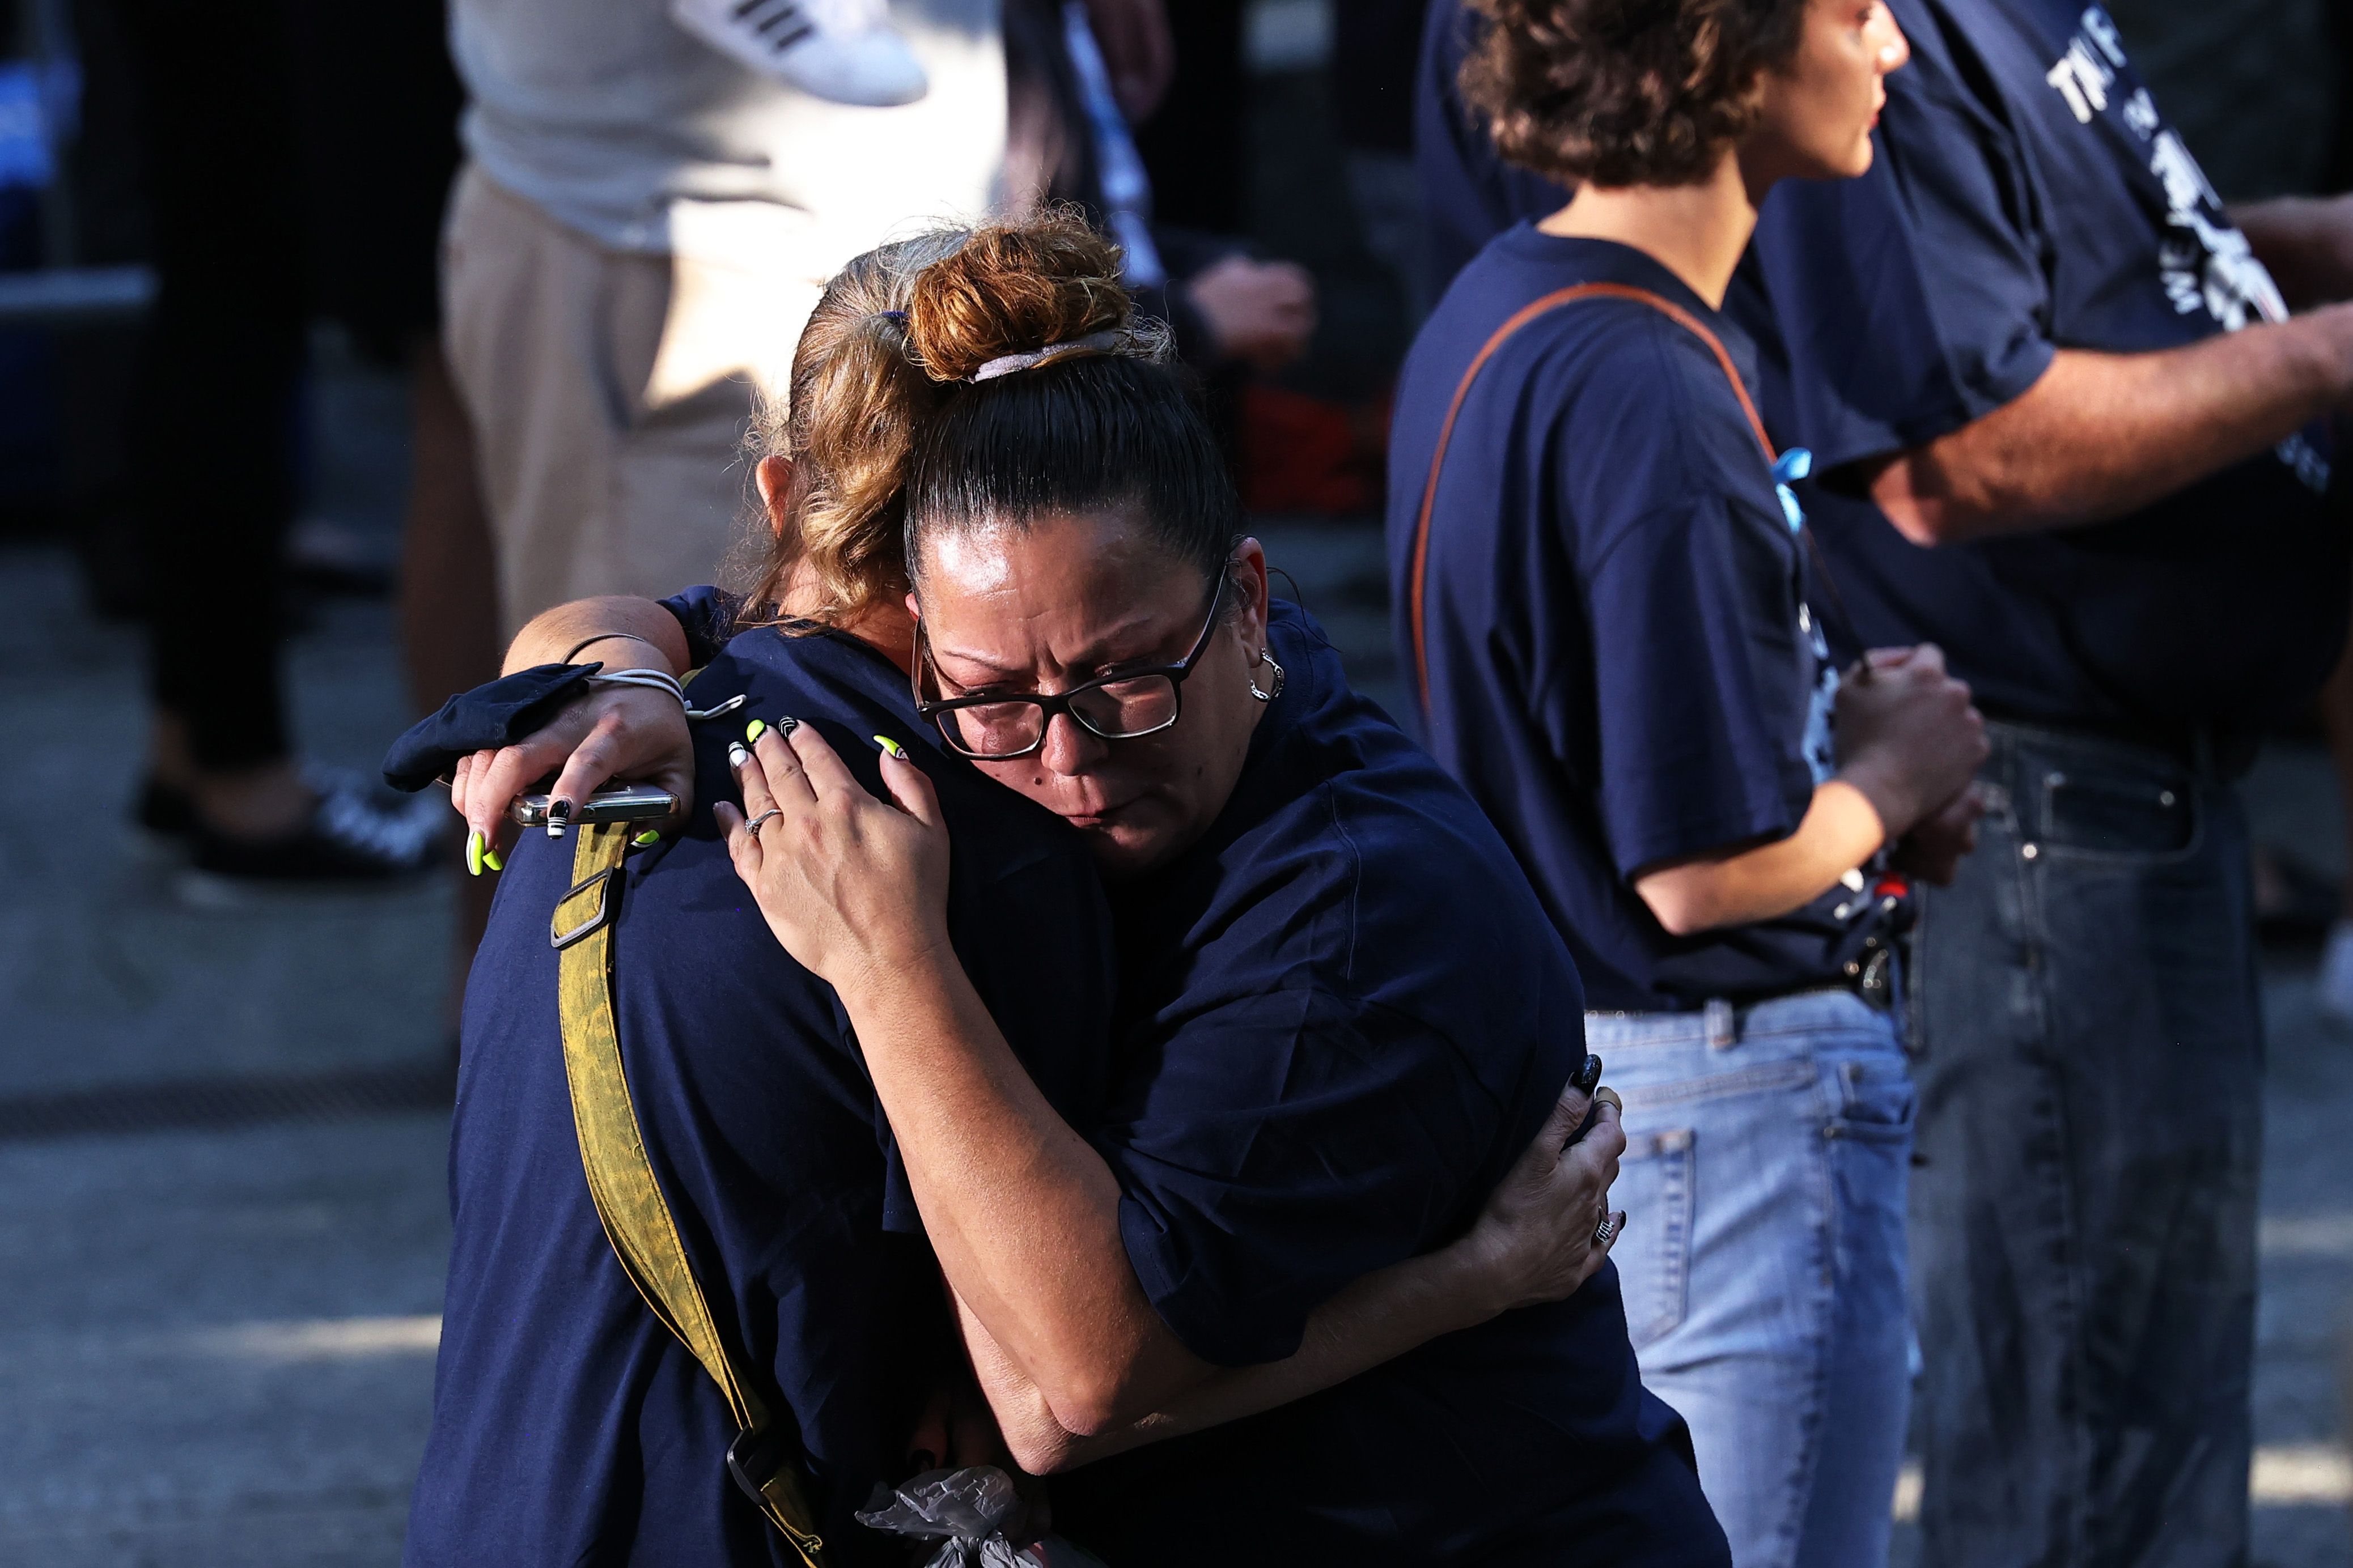 People embrace during the annual 9/11 Commemoration Ceremony at the National 9/11 Memorial and Museum